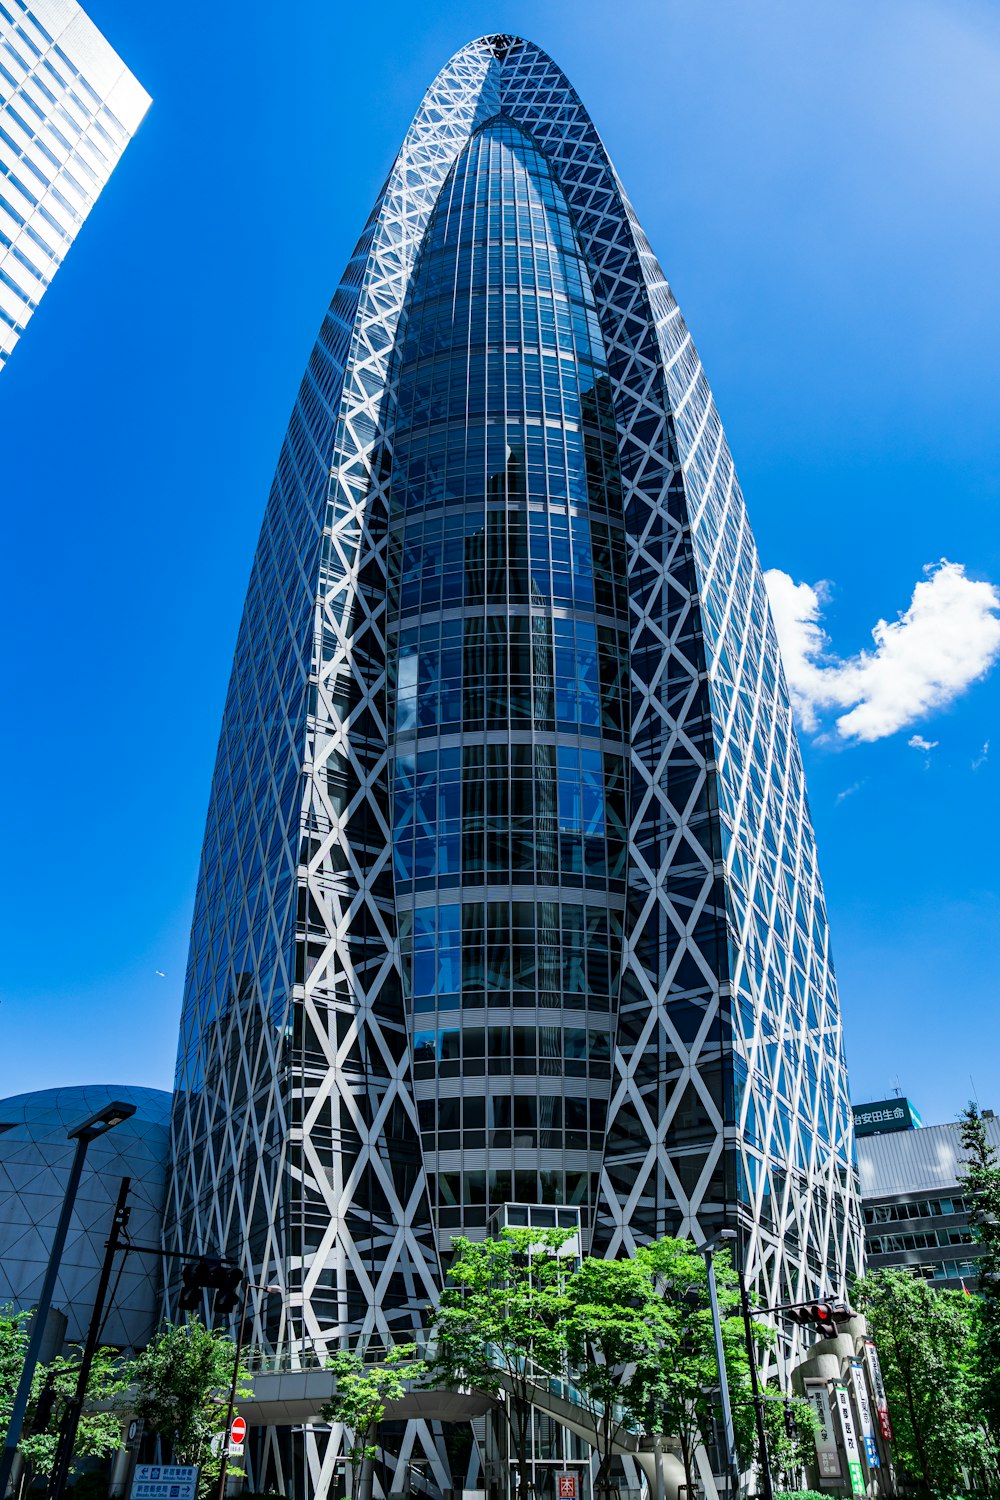 black and white glass building under blue sky during daytime